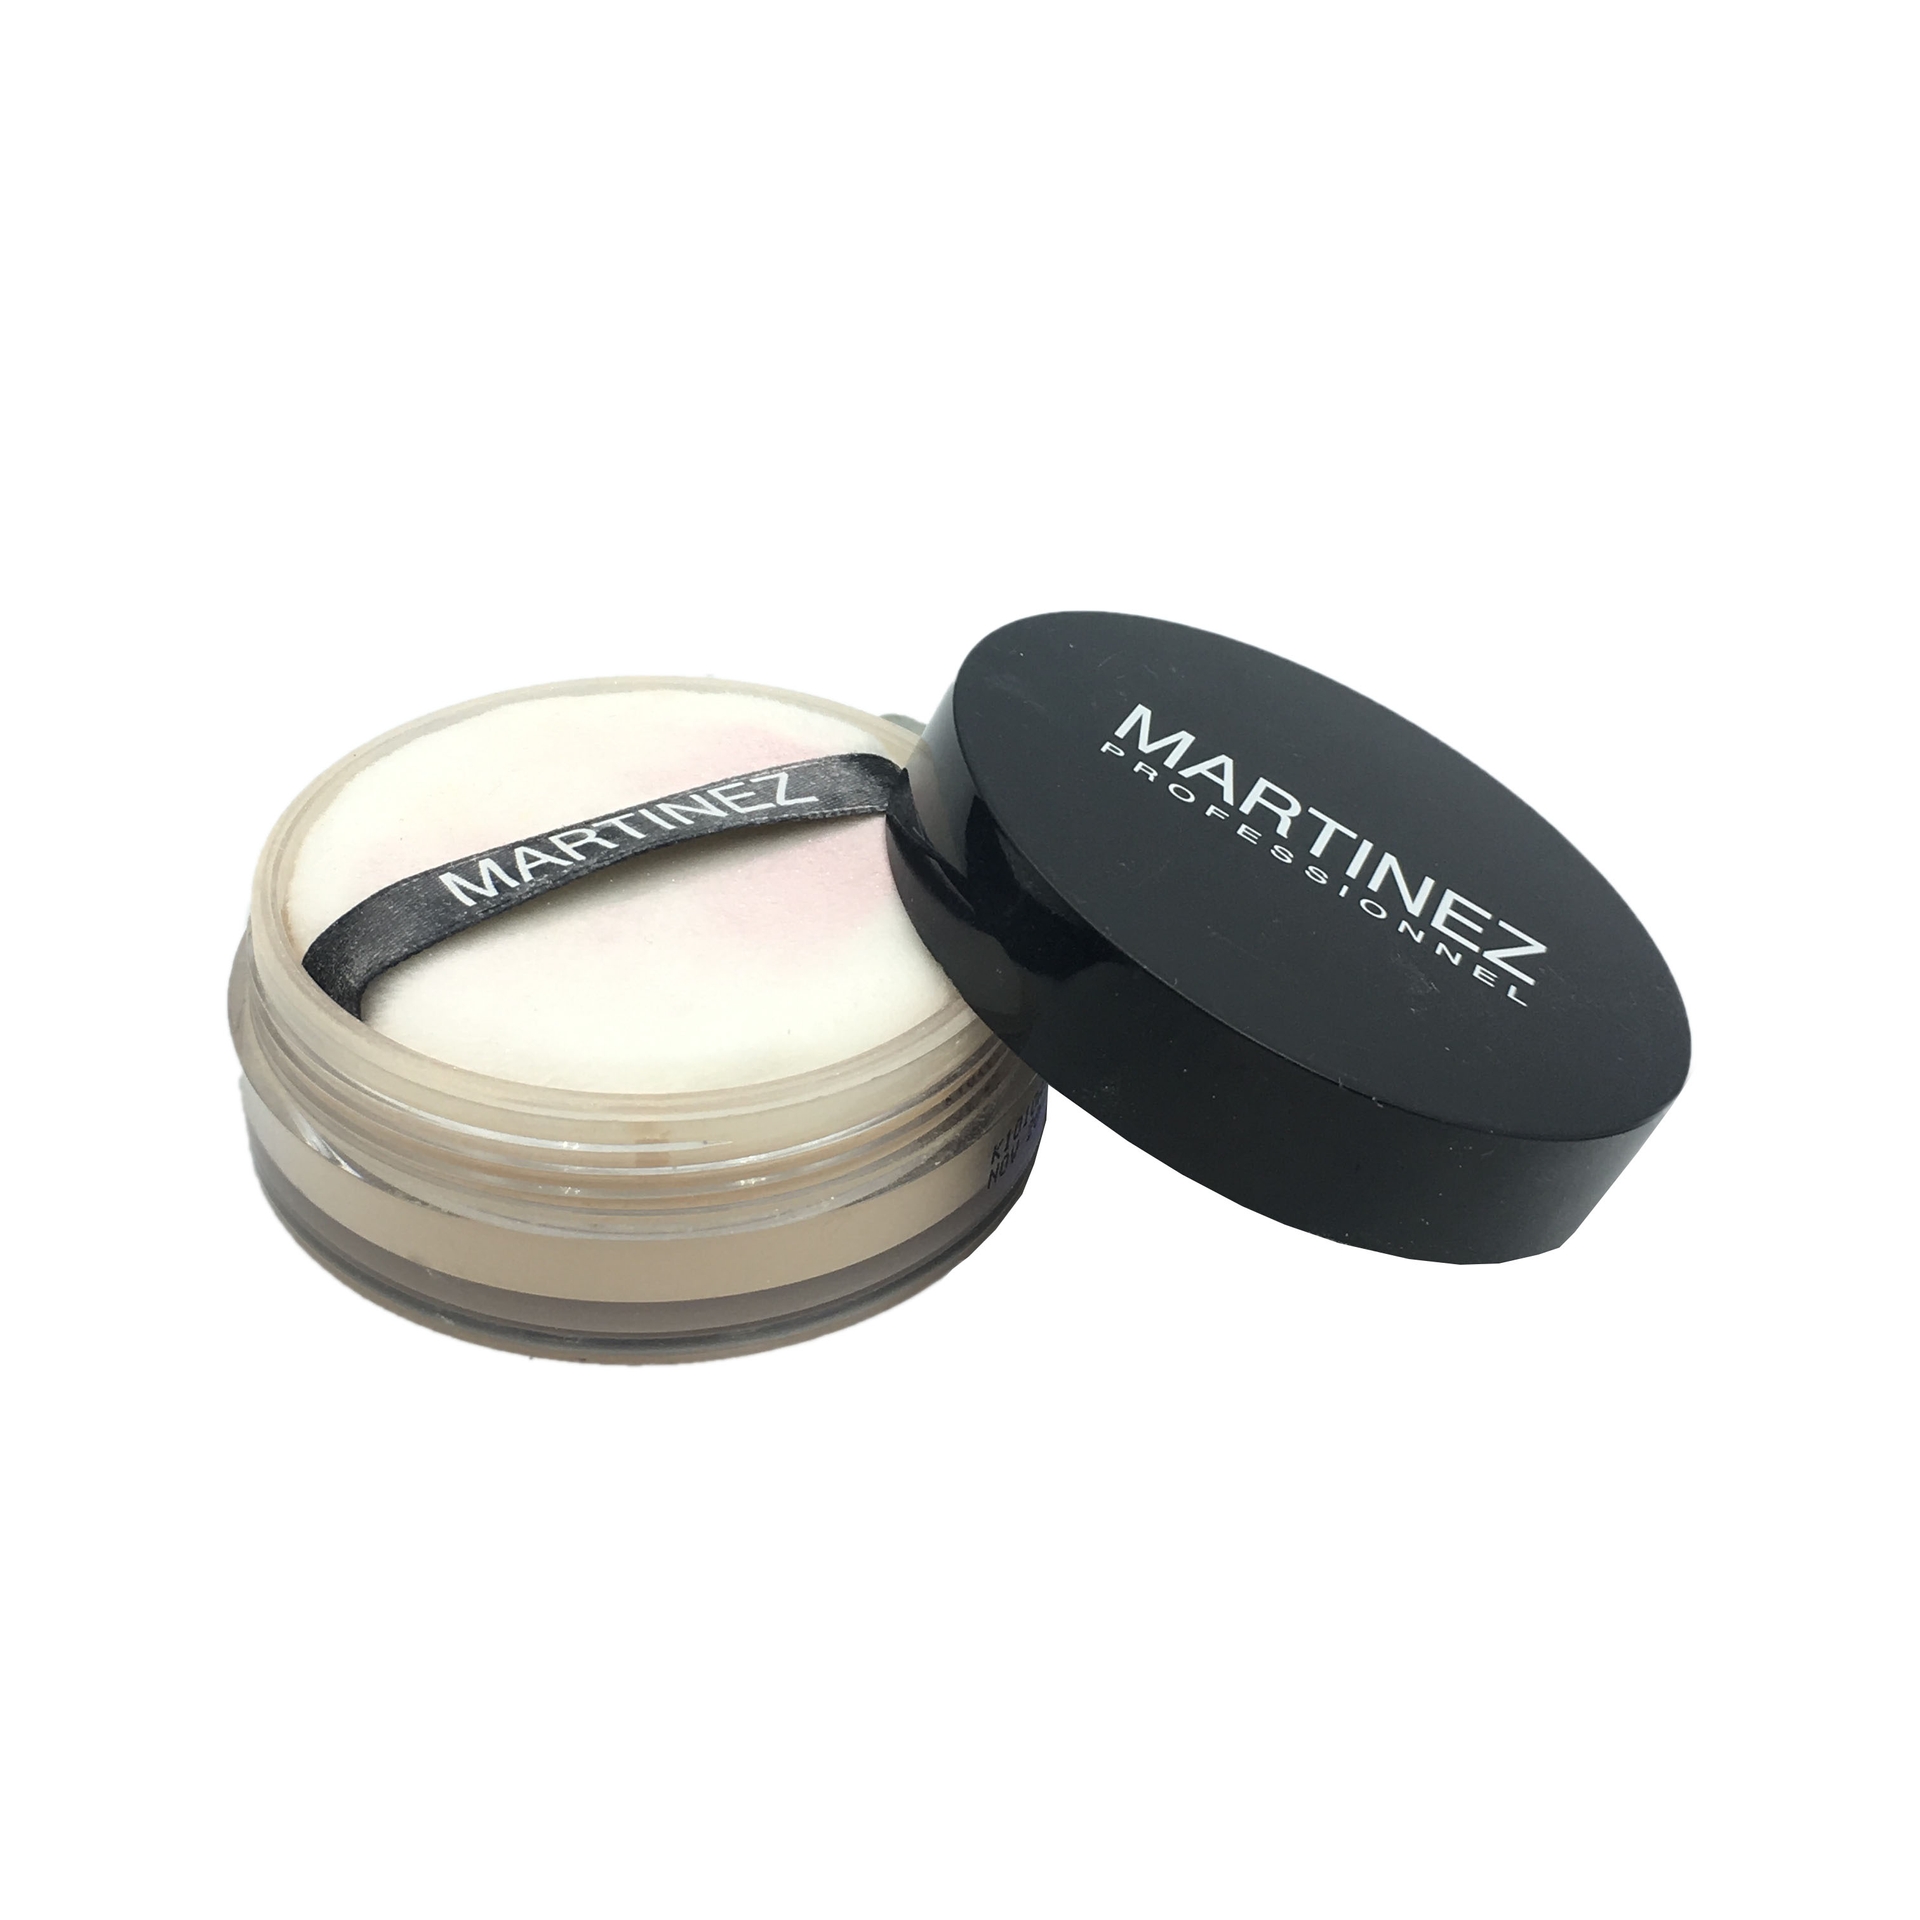 Private Collection Martinez Professionel High Perfomance Dramatic Glow Loose Powder 01 Natural Fair Faces